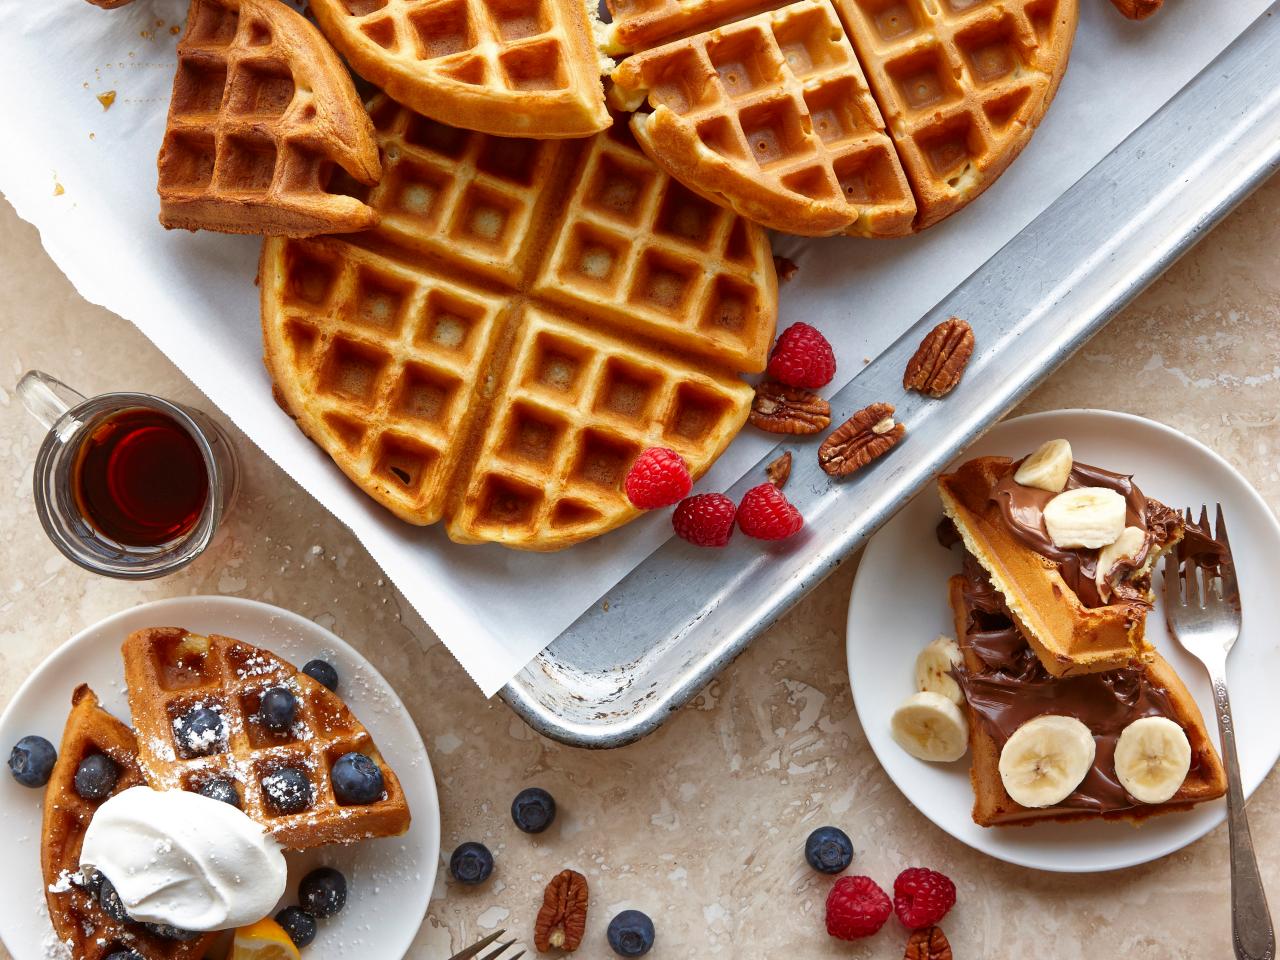 https://food.fnr.sndimg.com/content/dam/images/food/fullset/2020/09/03/waffles-with-lots-of-toppings.jpg.rend.hgtvcom.1280.960.suffix/1599159337046.jpeg